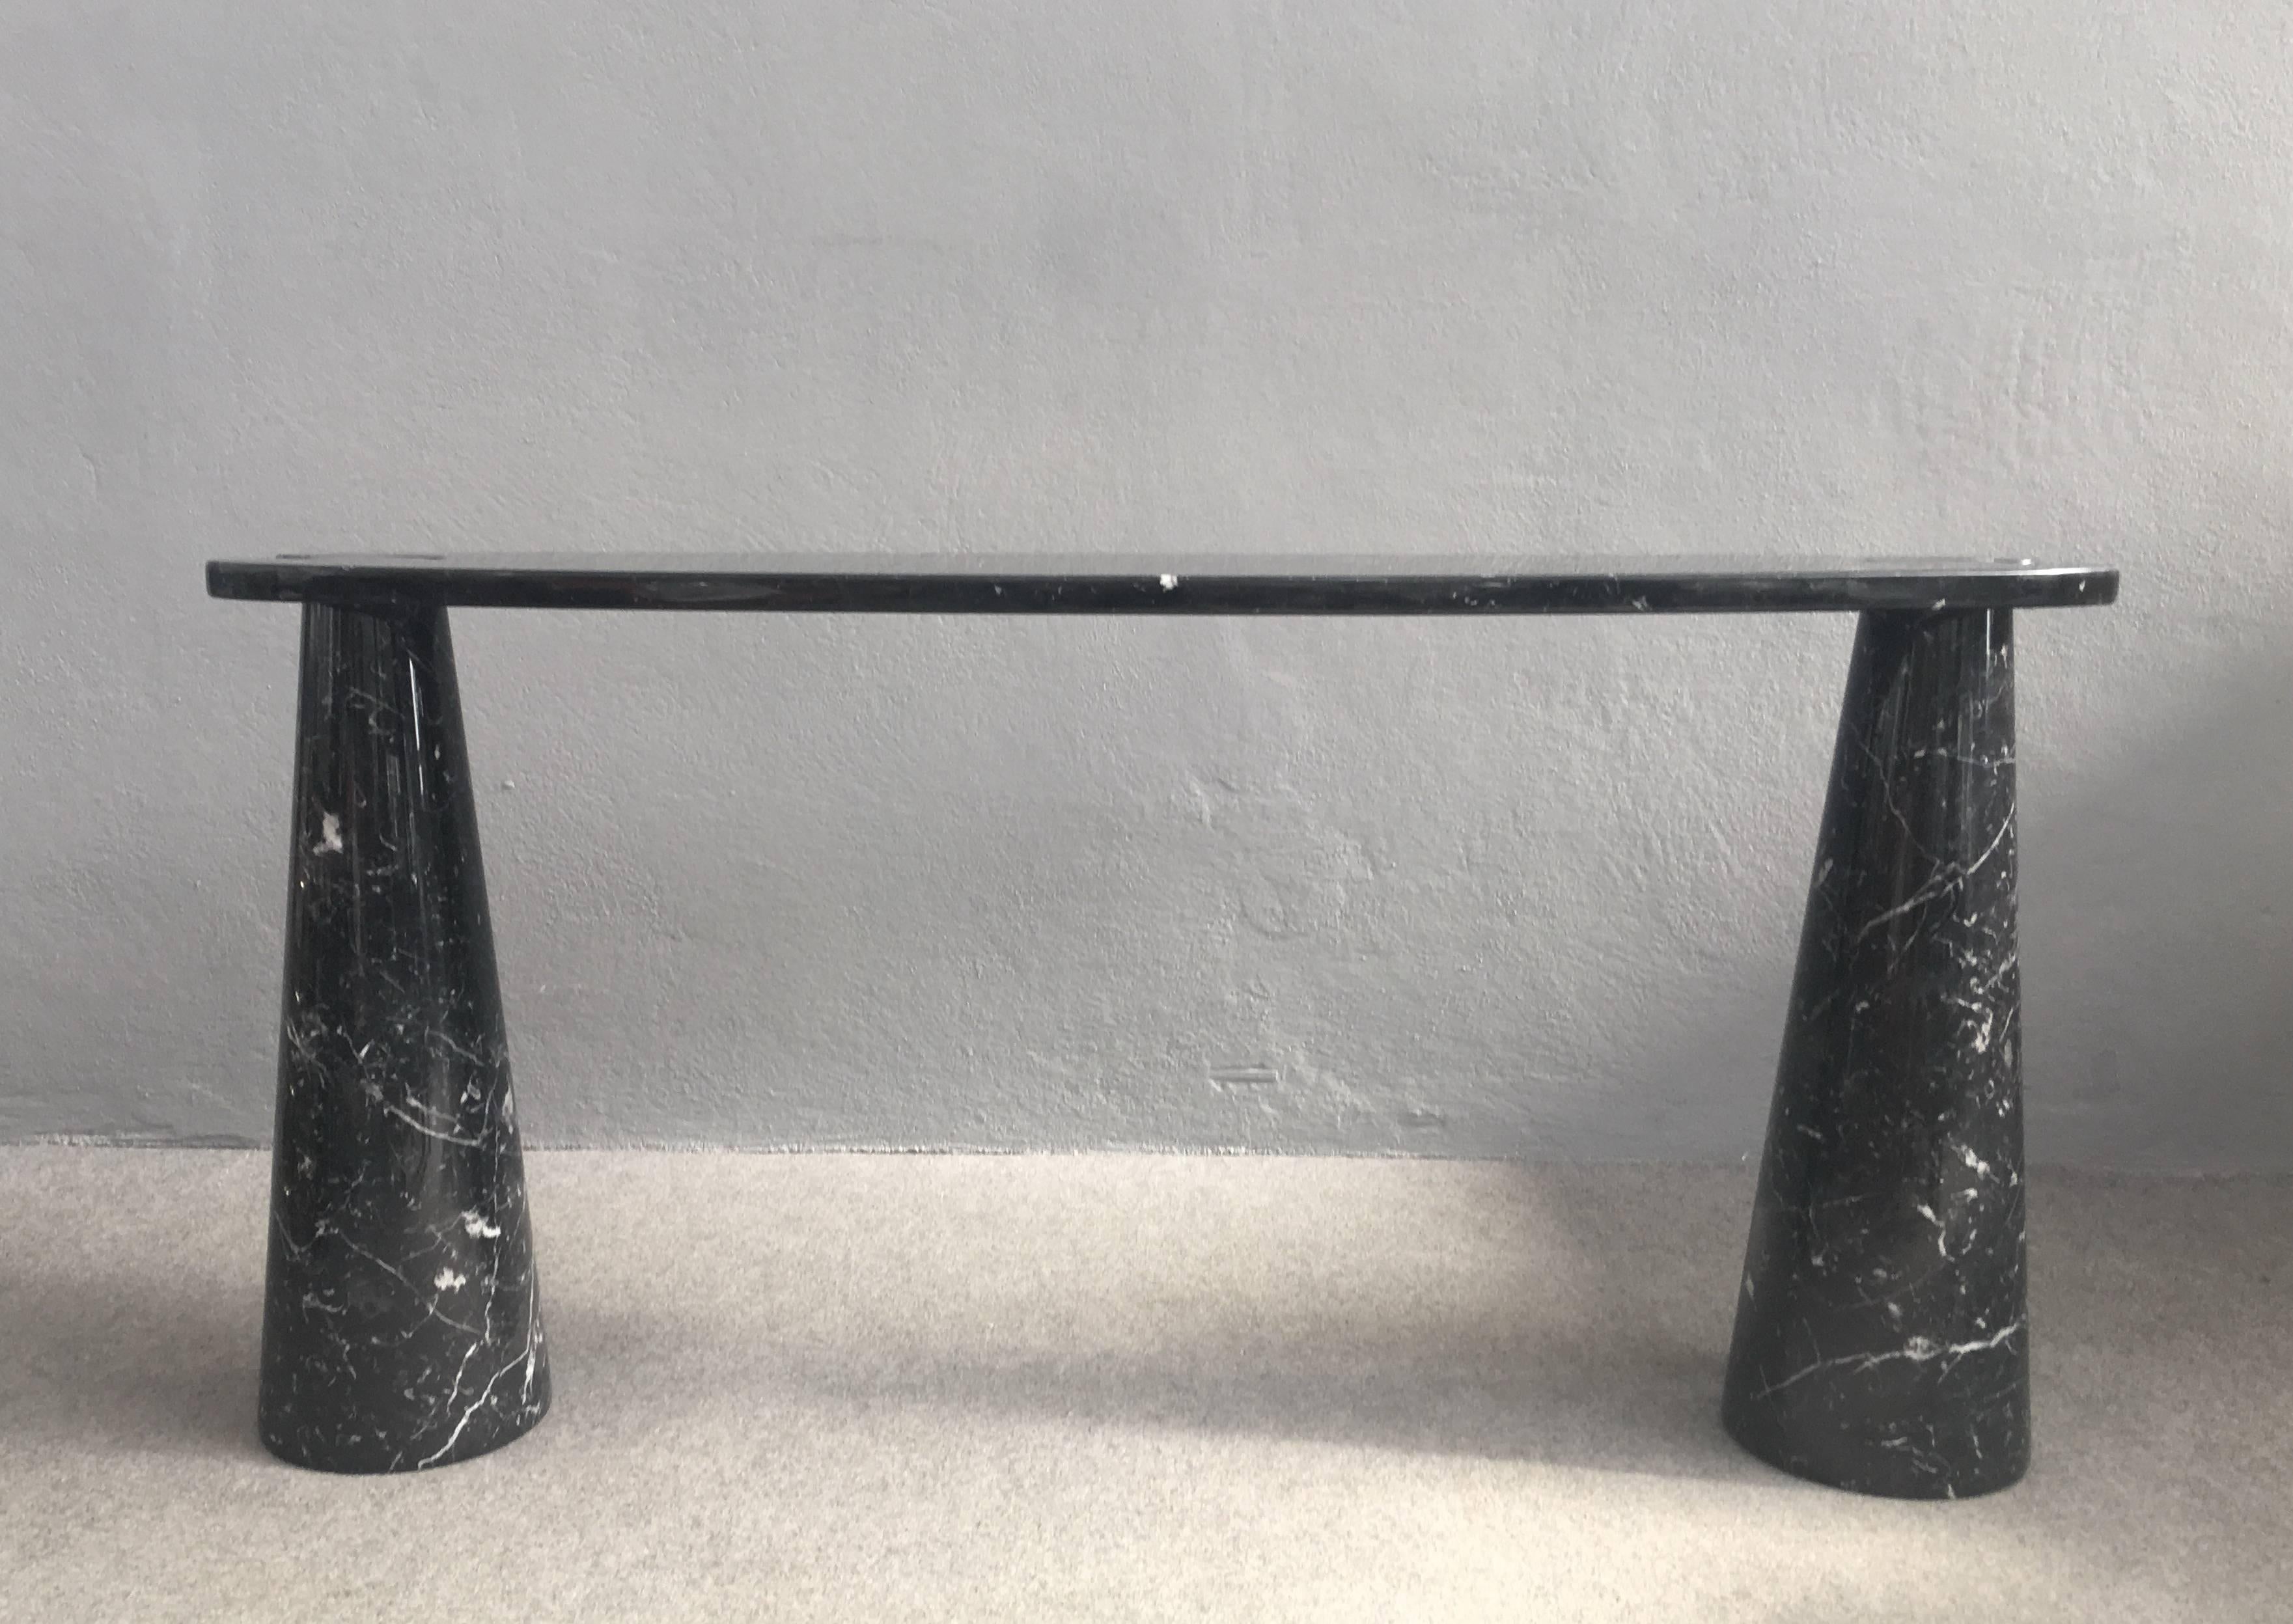 Wonderful black marble console table designed by Angelo Mangiarotti.
Eros series, Skipper edition.